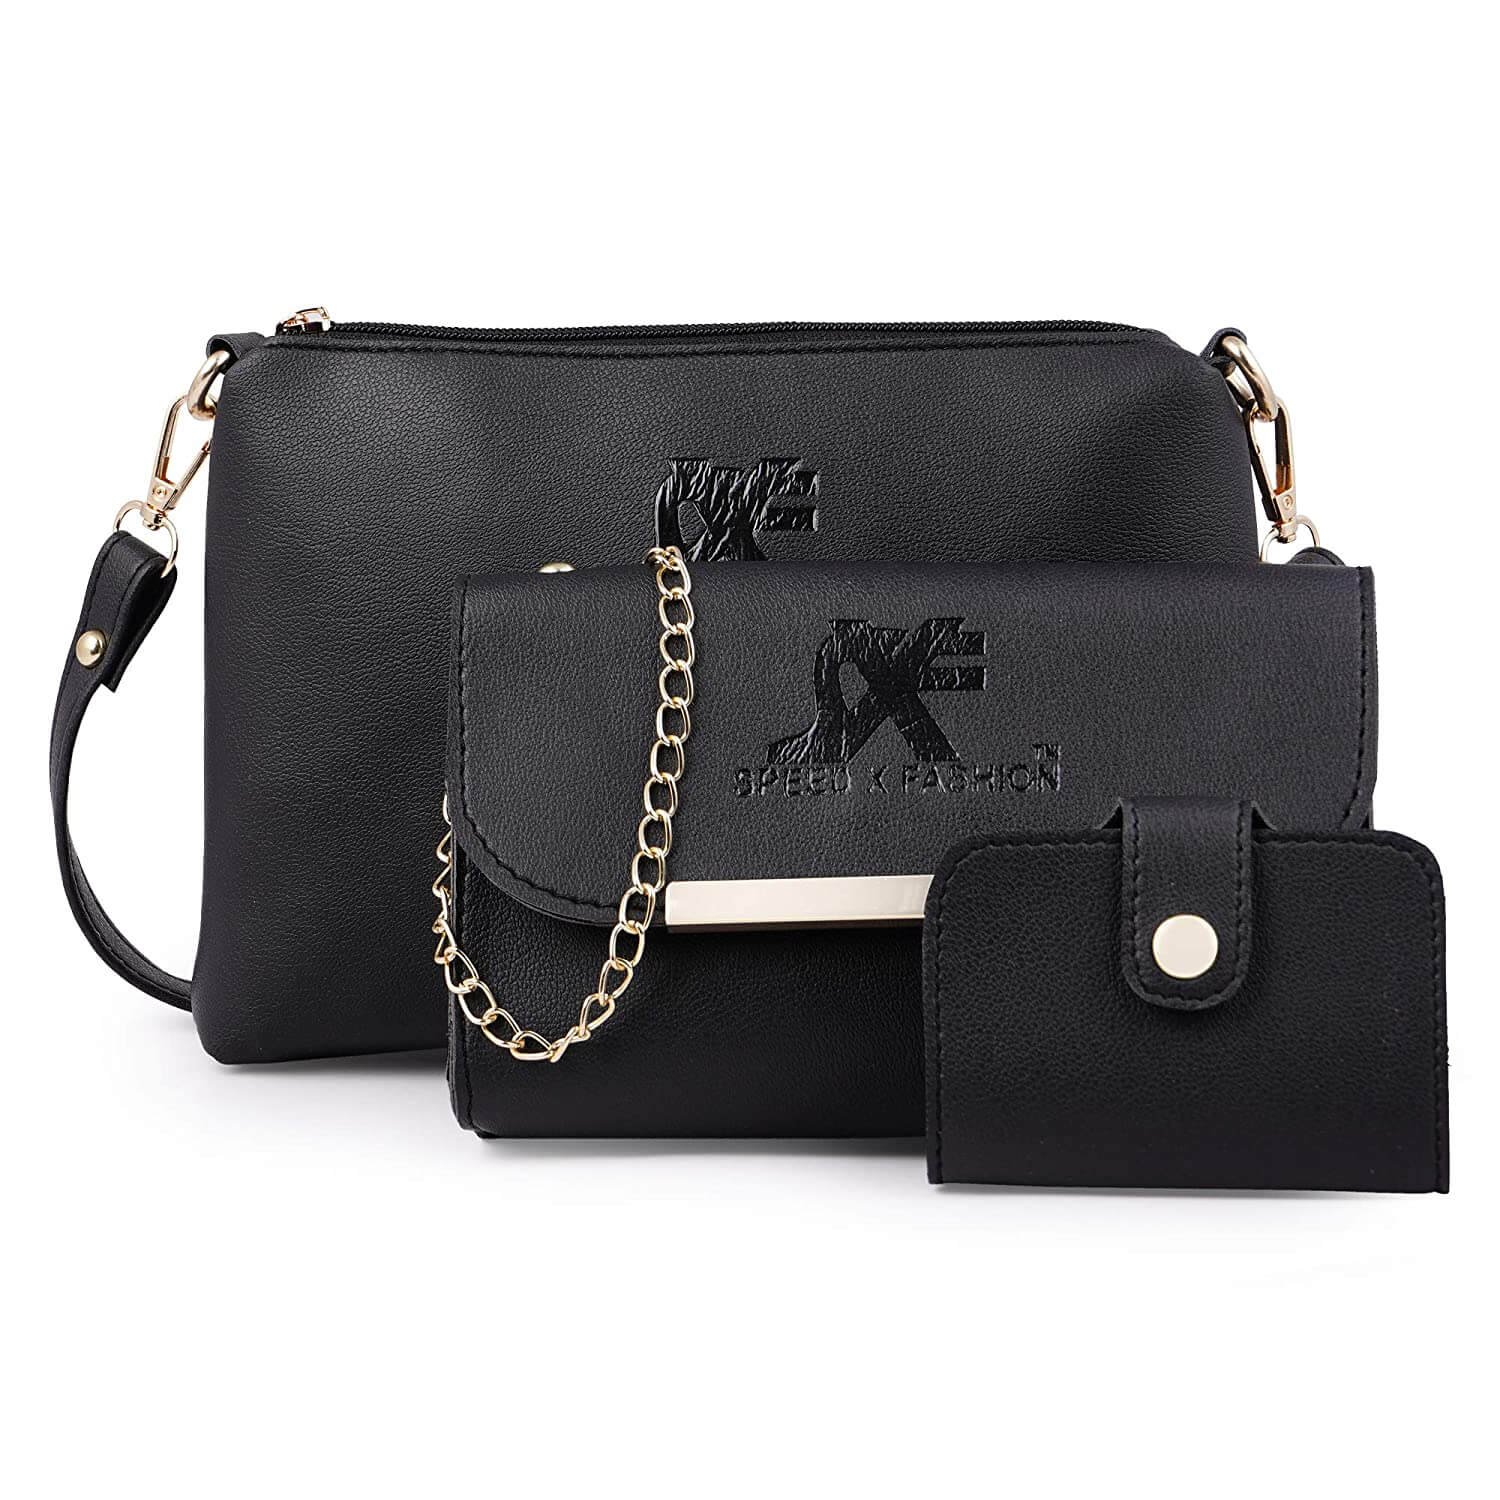 https://shoppingyatra.com/product_images/Speed X Fashion Women Hand Bag With Combo22.jpg